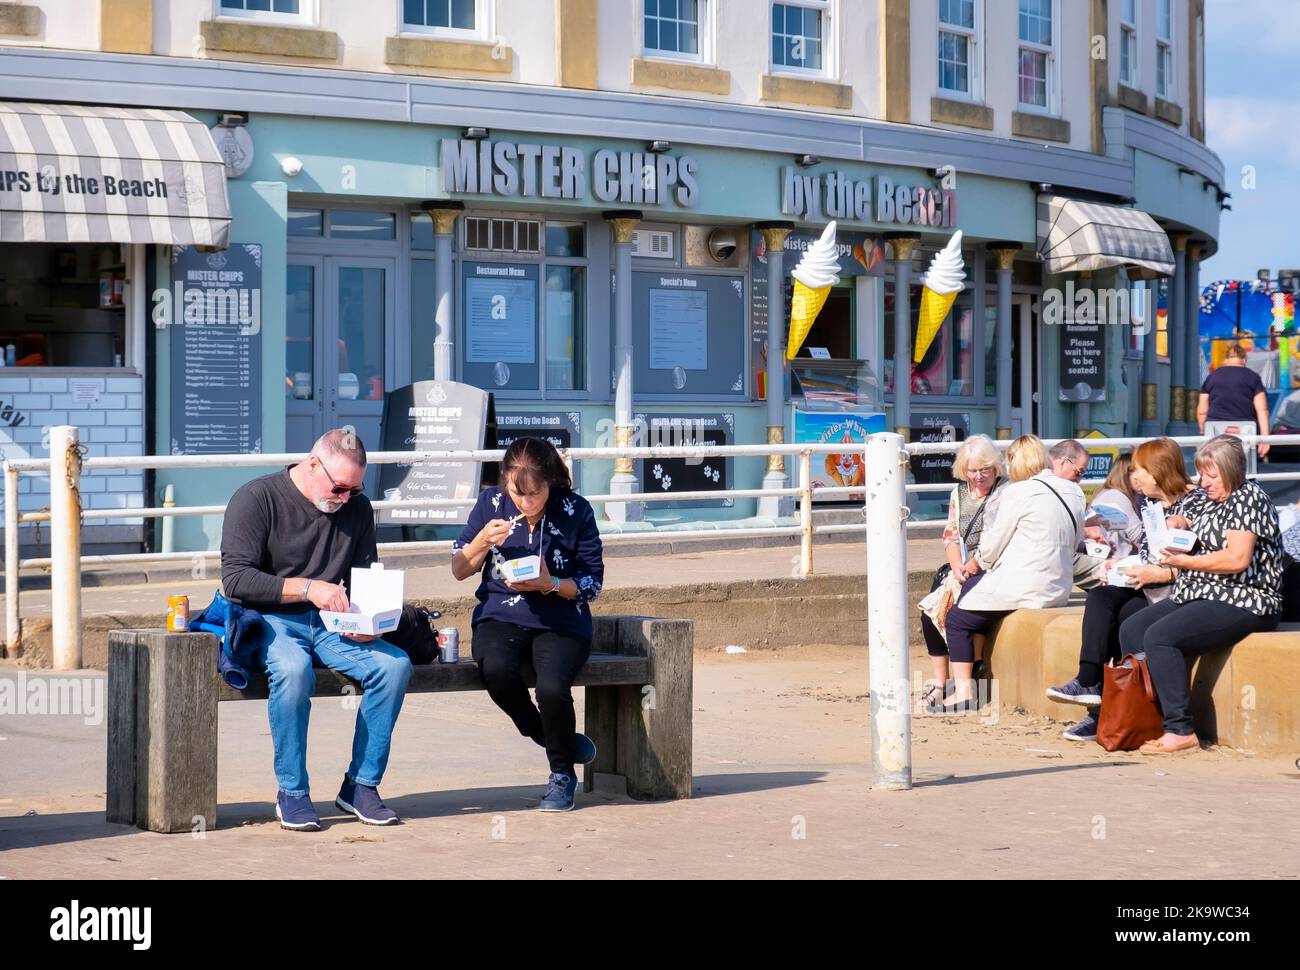 WHITBY, UK - September 21, 2022. People sitting eating fish and chips on a bench outside a fish and chip shop, Whitby Harbour, North Yorkshire Stock Photo